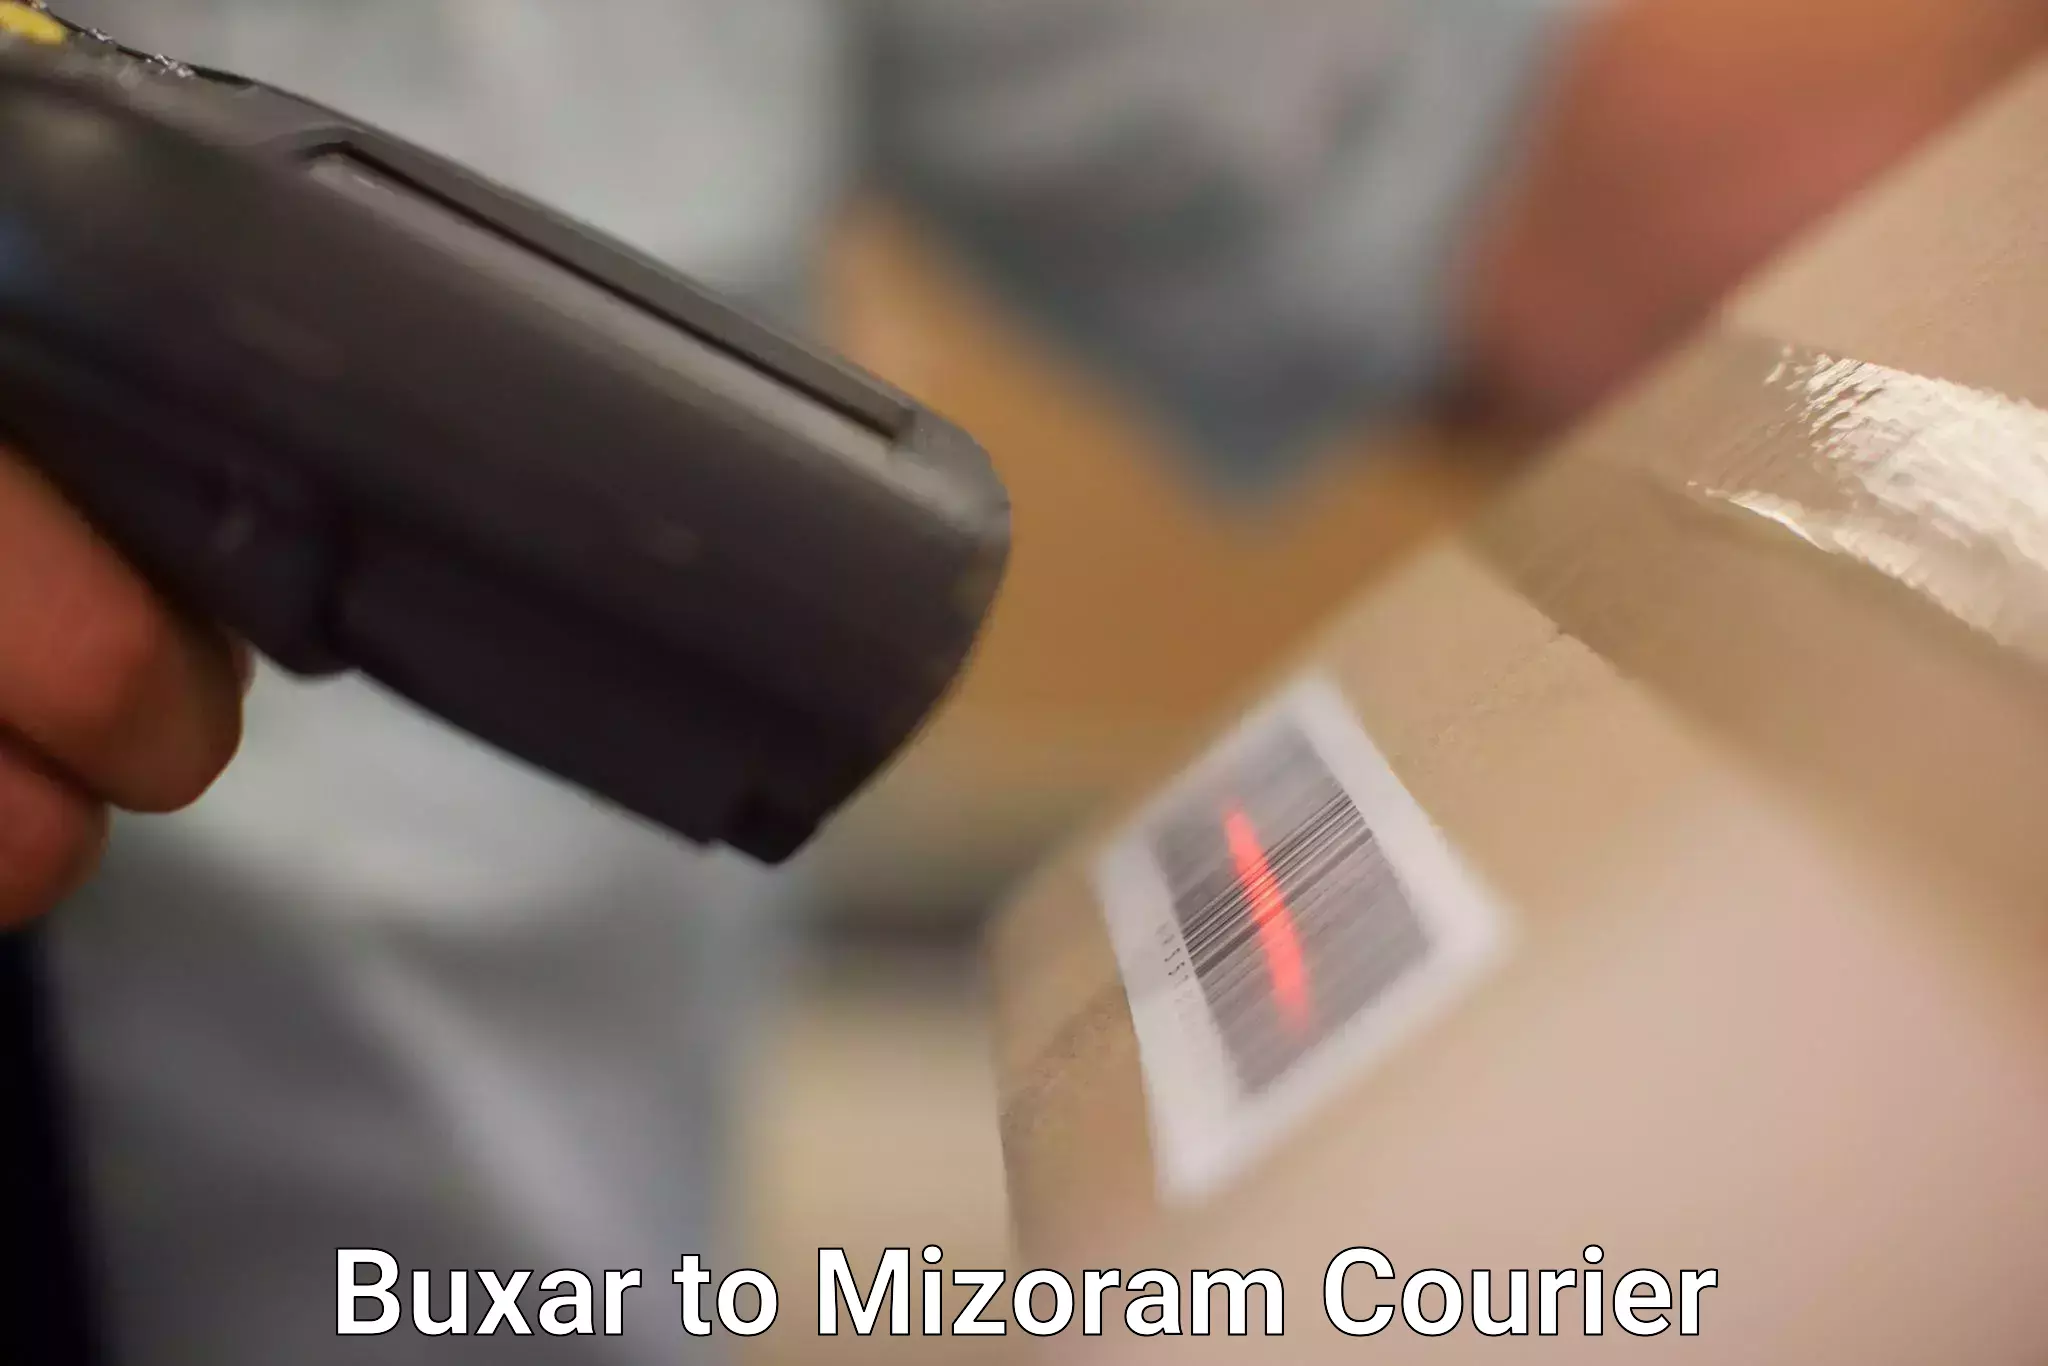 Package delivery network Buxar to Darlawn